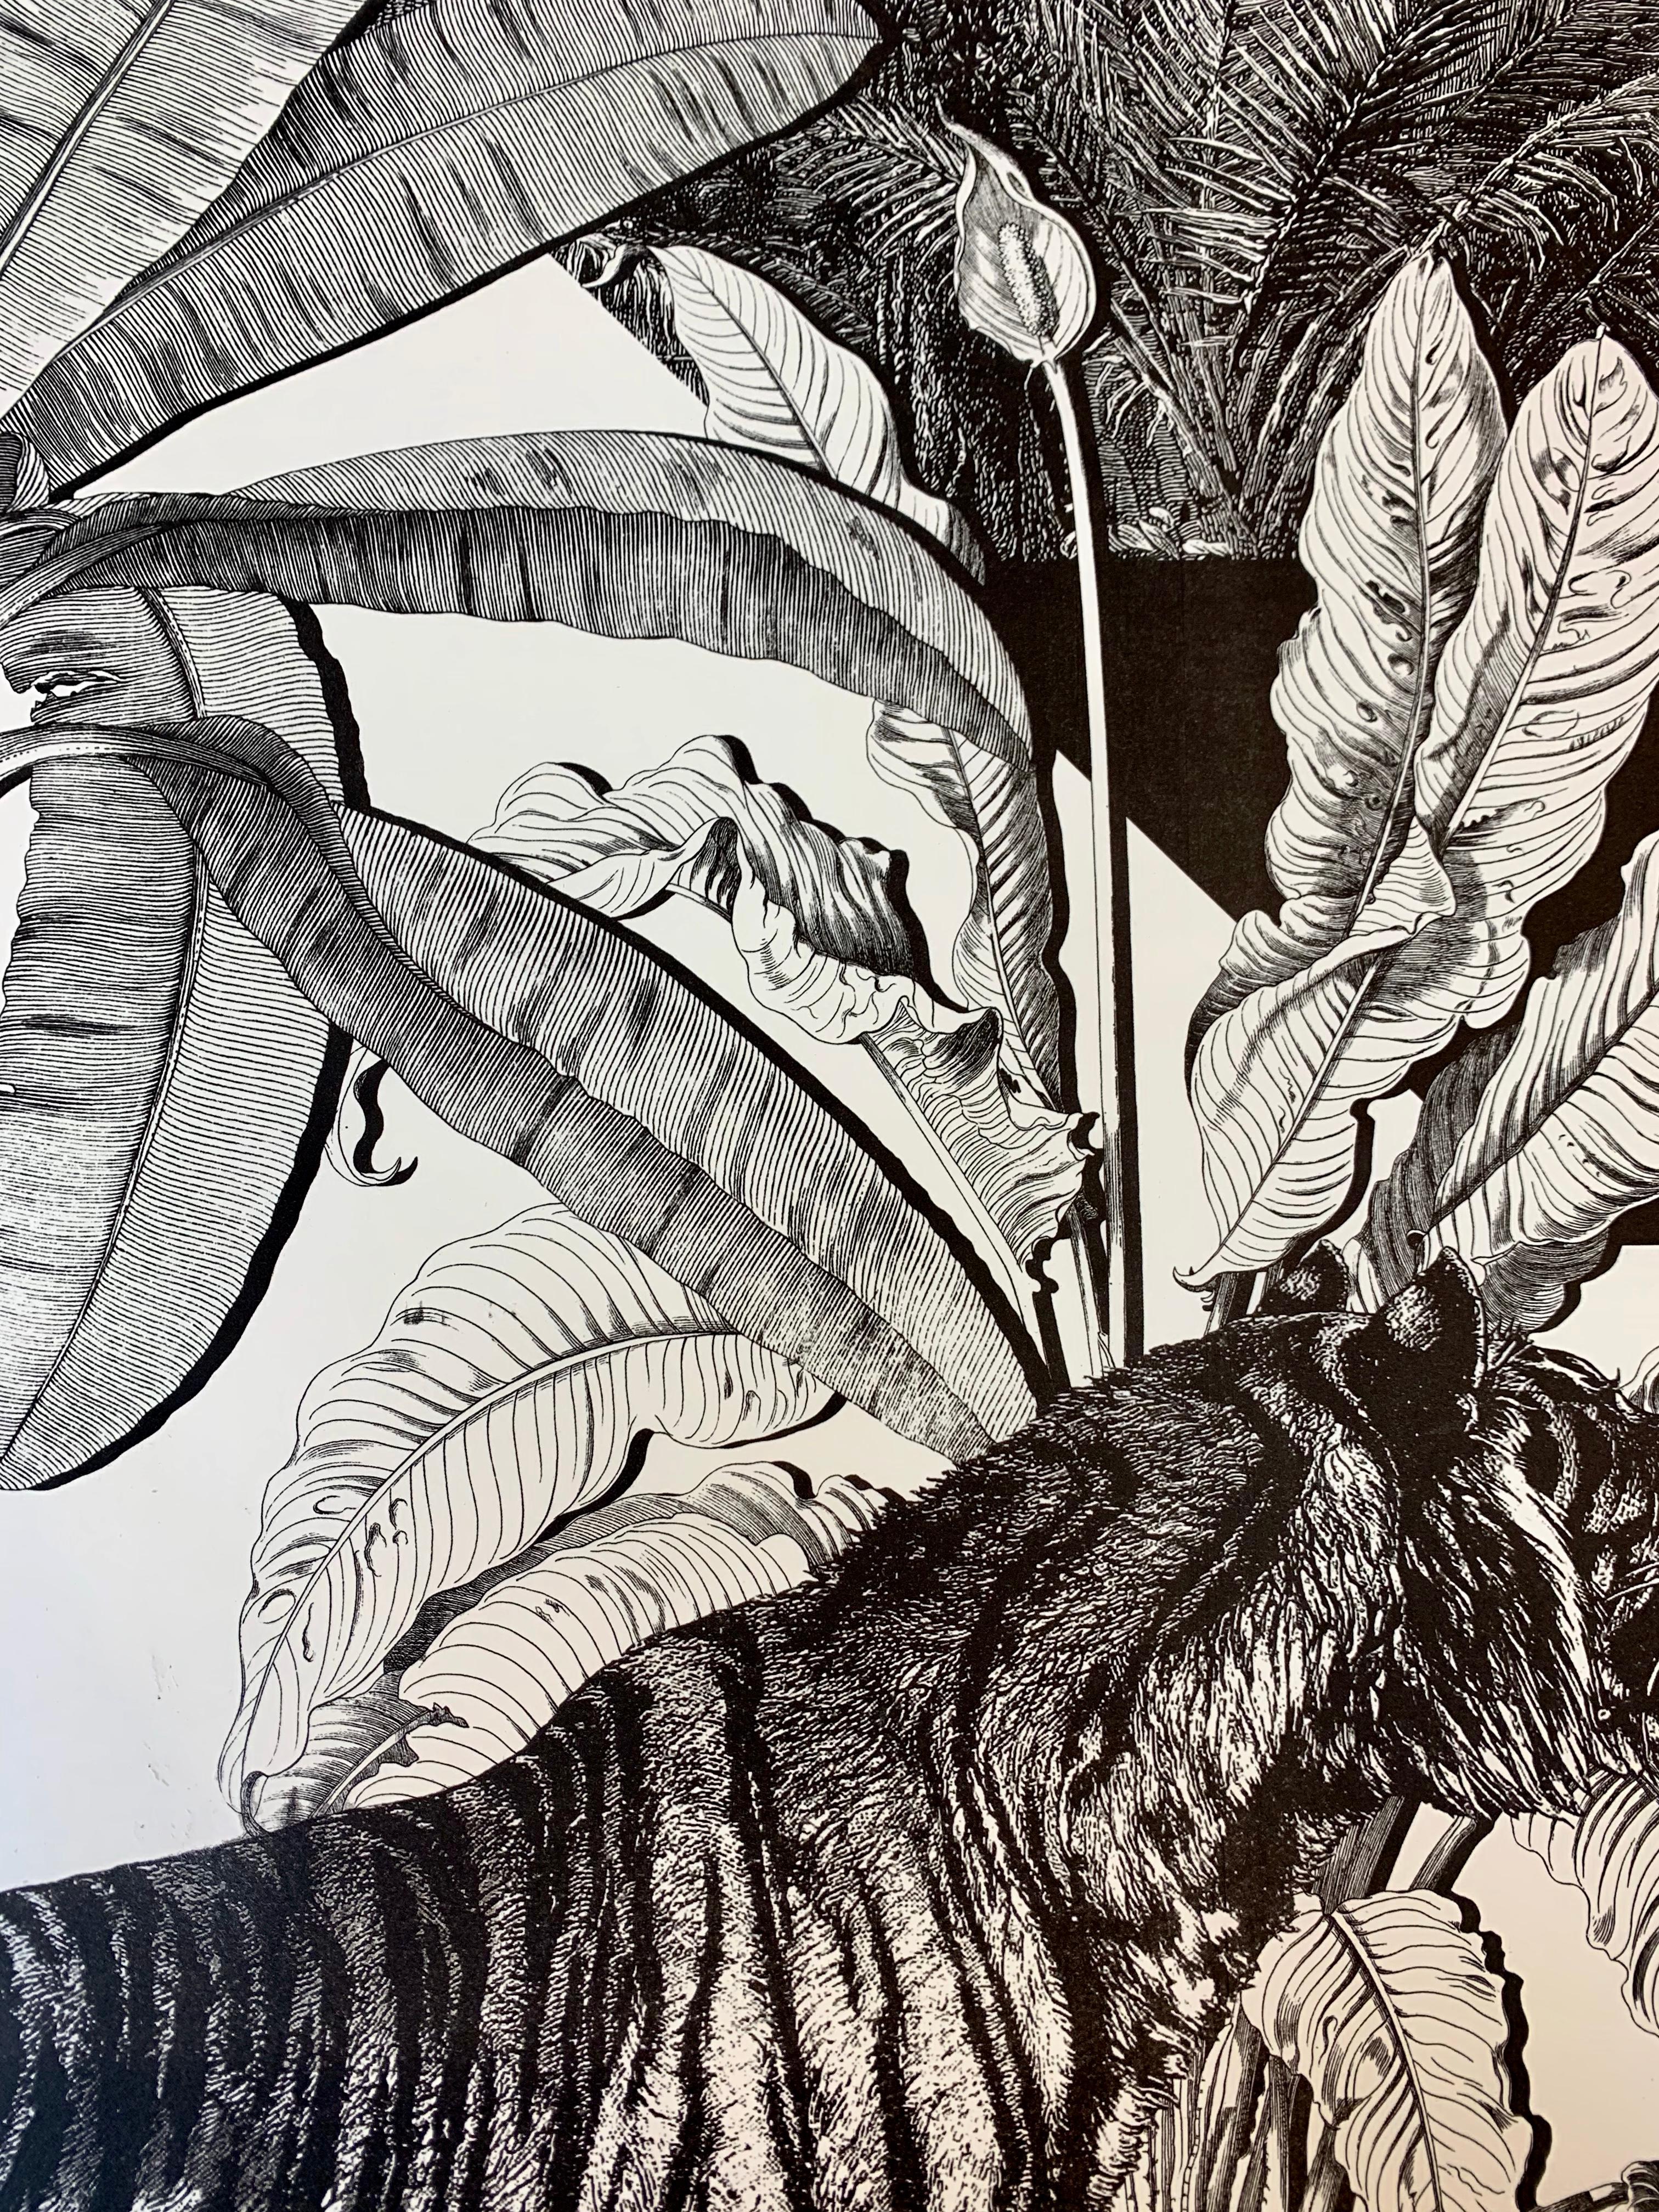 From the limited edition series ''Black & Wild''. Black and white image of tropical fauna and flora handprinted with an antique  press on 100% cotton engraving paper. Panthers rhinos and tropical birds pose against a lush background of